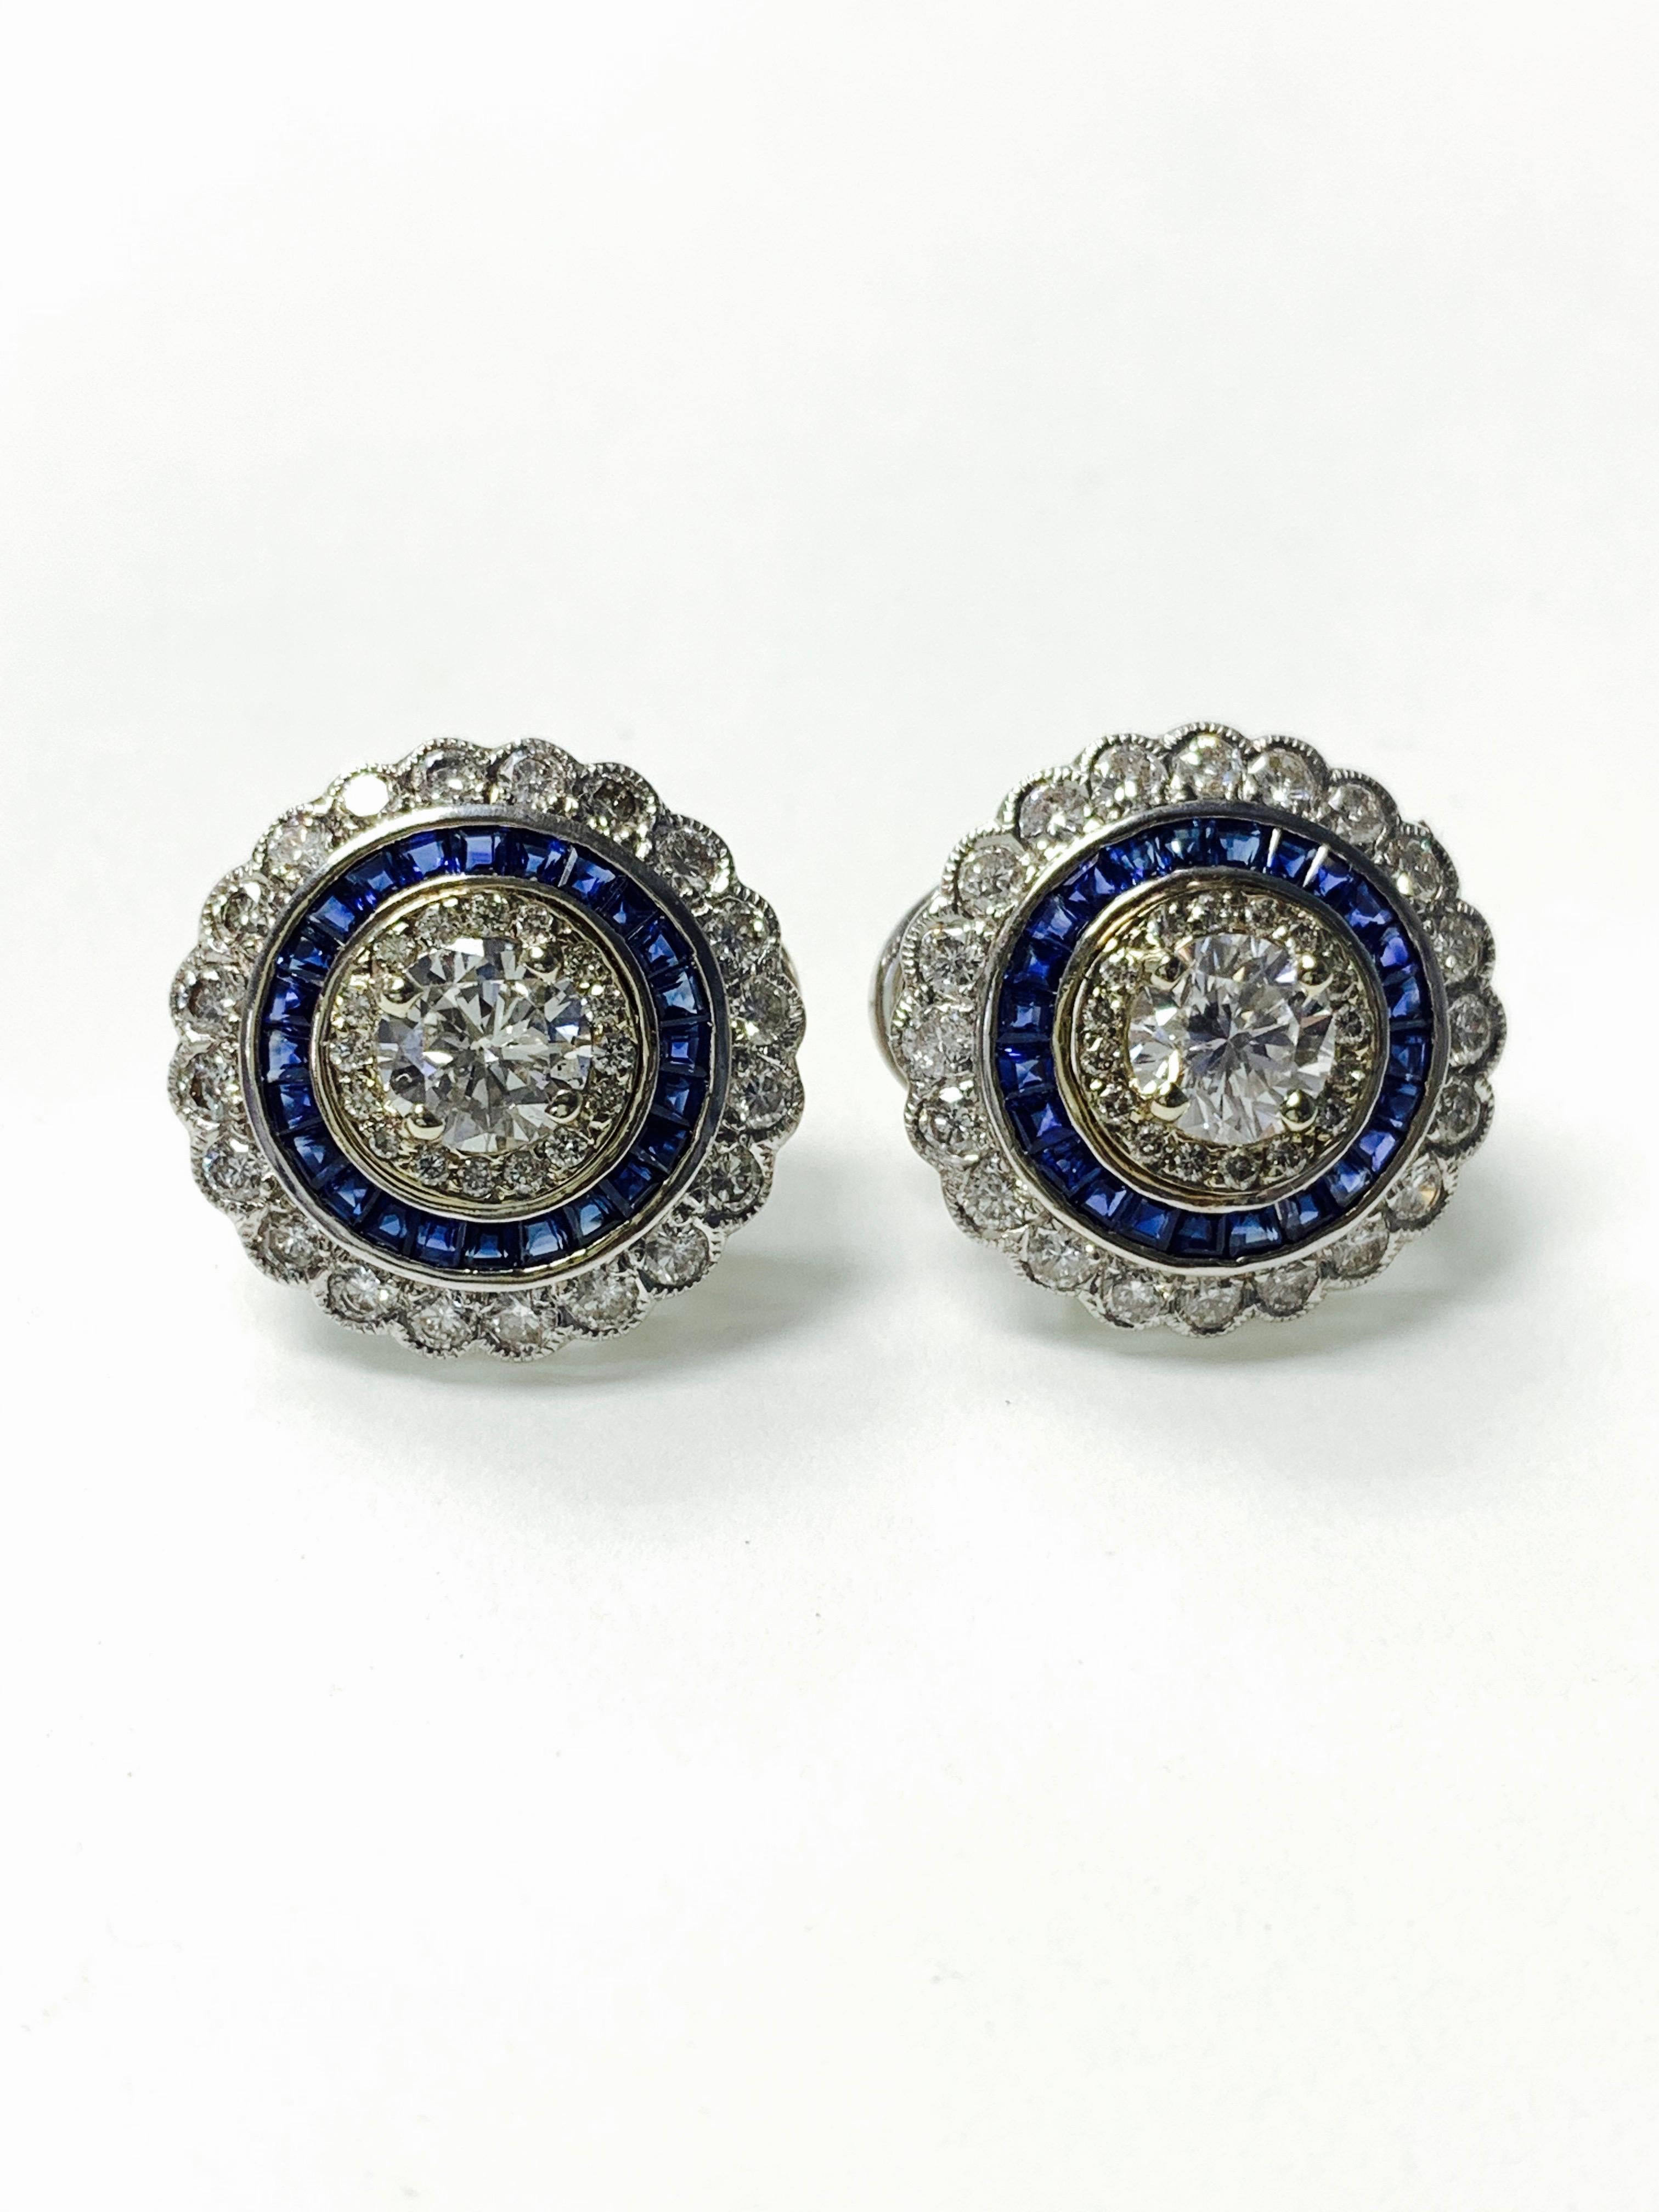 Gorgeous Diamond and blue sapphire stud earrings handcrafted in 18k white gold. 
The details are as follows: 
Diamond weight: 1.16 carat (center ) + 2 carat 
Blue sapphire weight: 0.75 carat 
Metal: 18K white gold 
Dimensions: 16.5mm 
